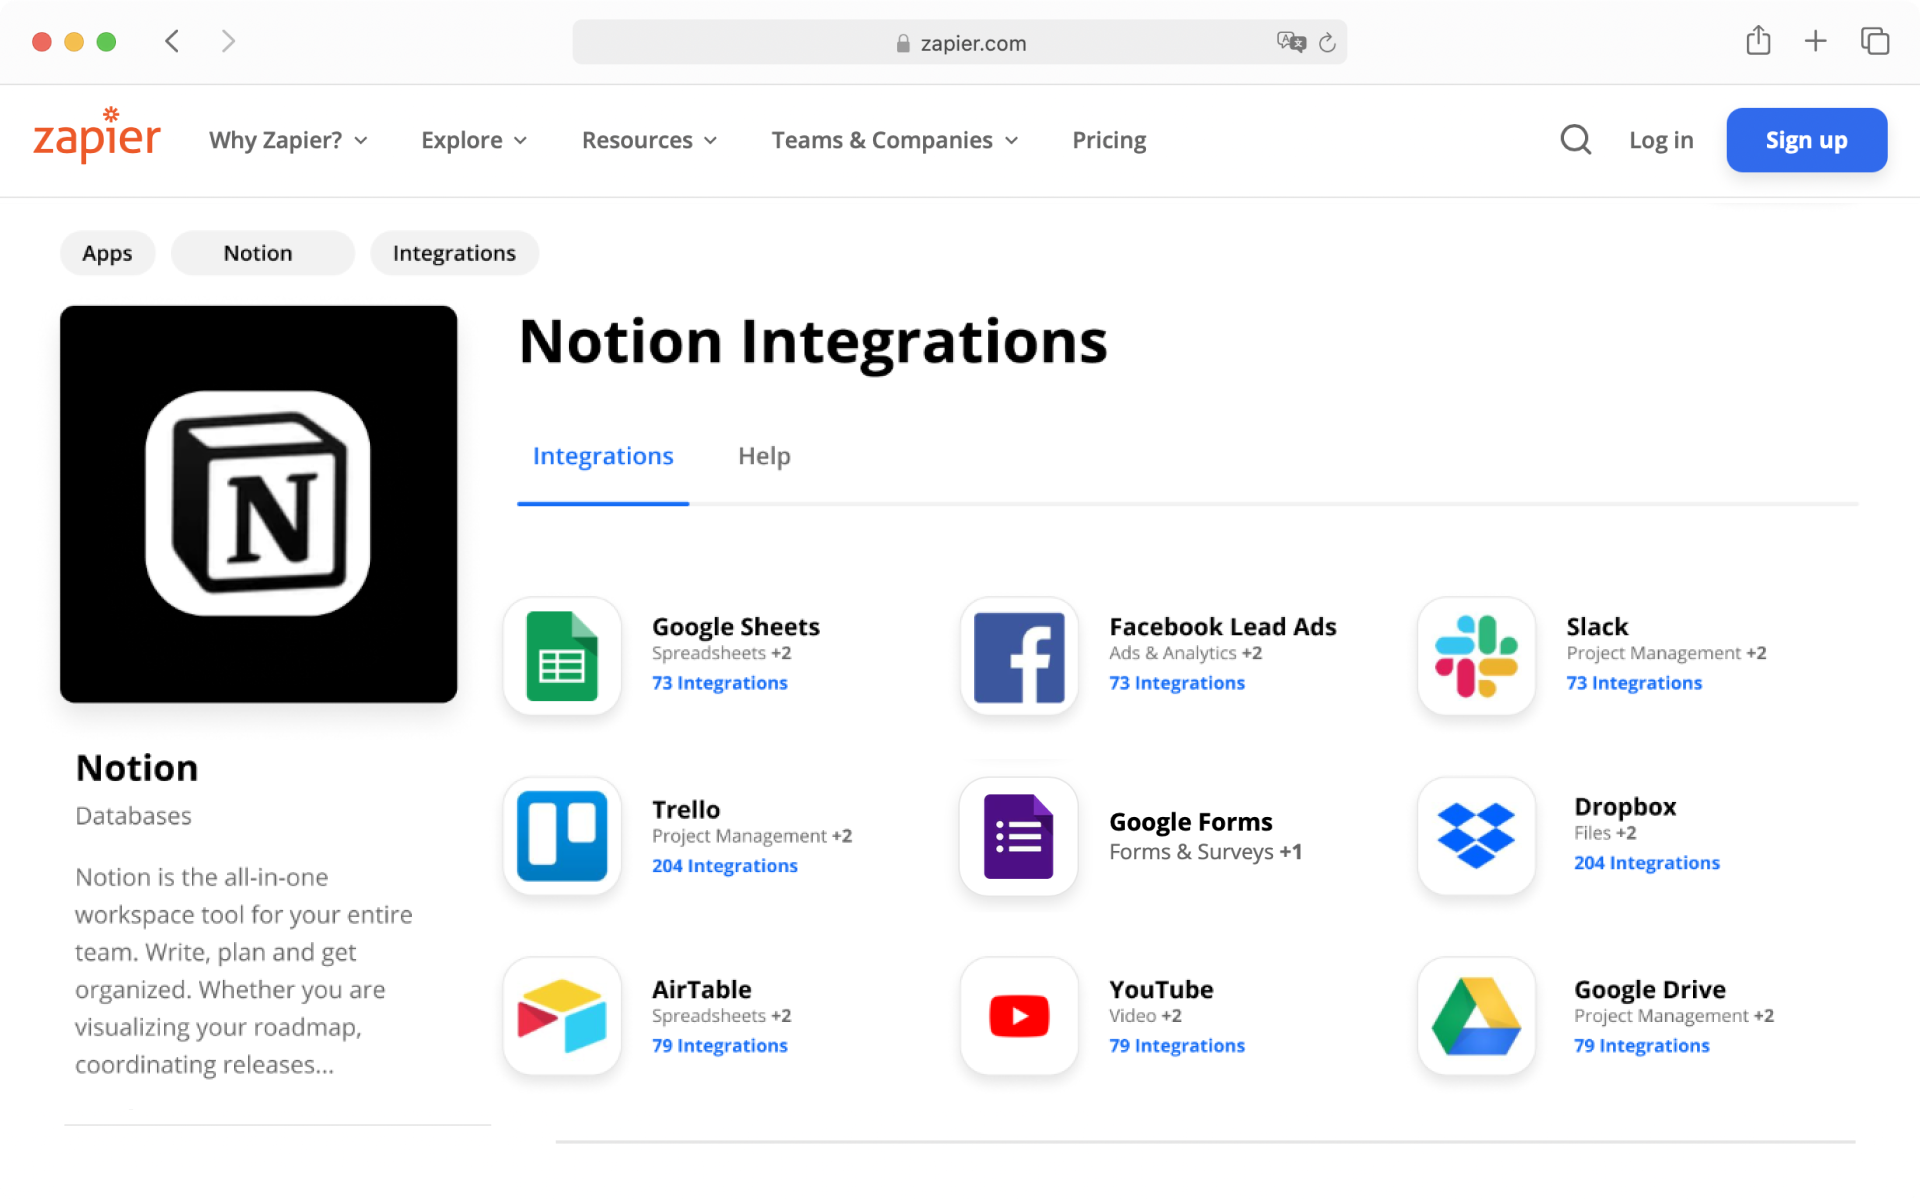 Here’s where you can access Zapier’s integration.